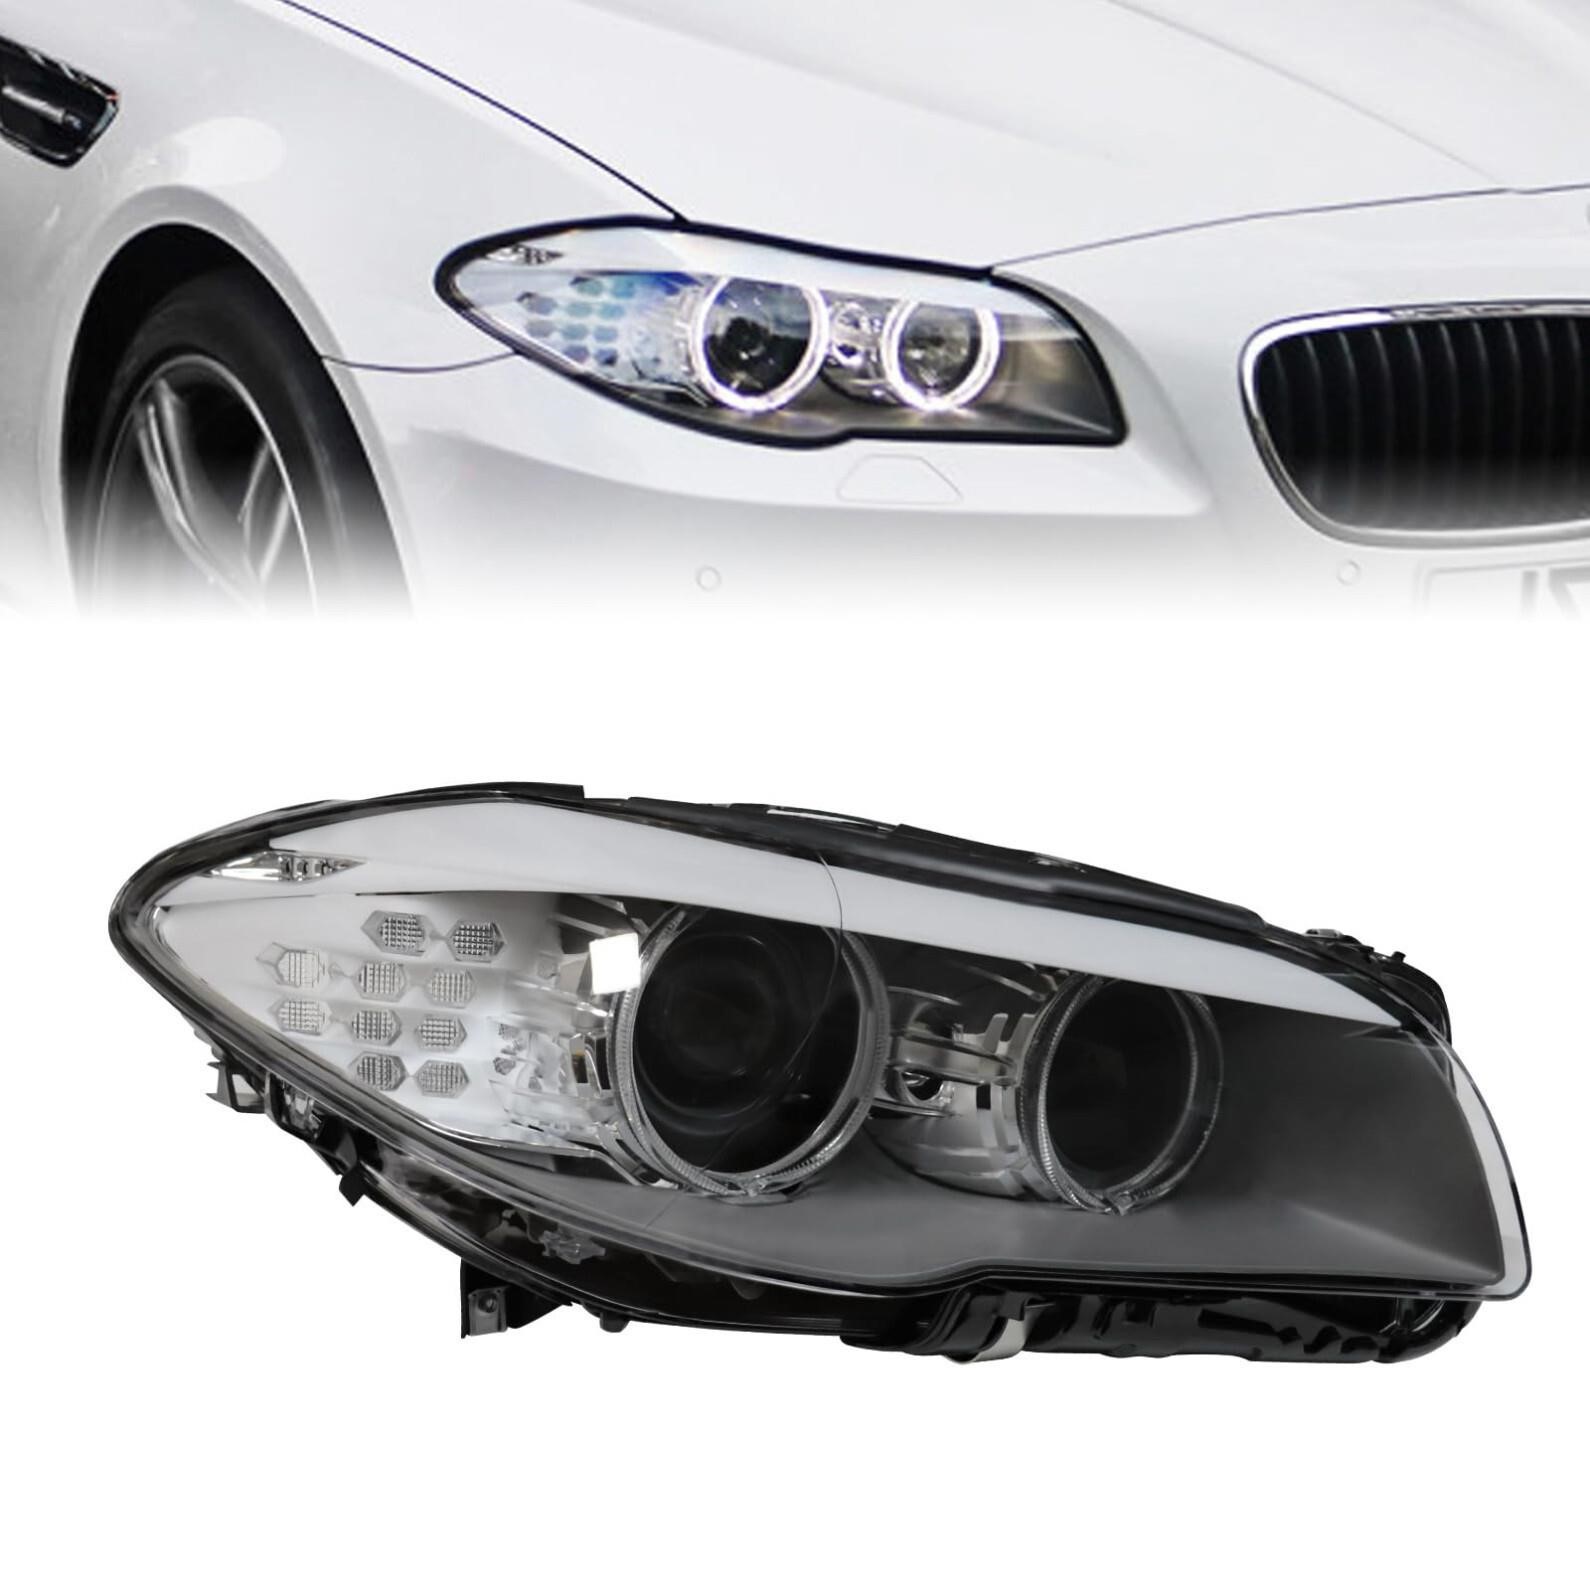 HID Xenon Headlights Assembly Replacement for BMW